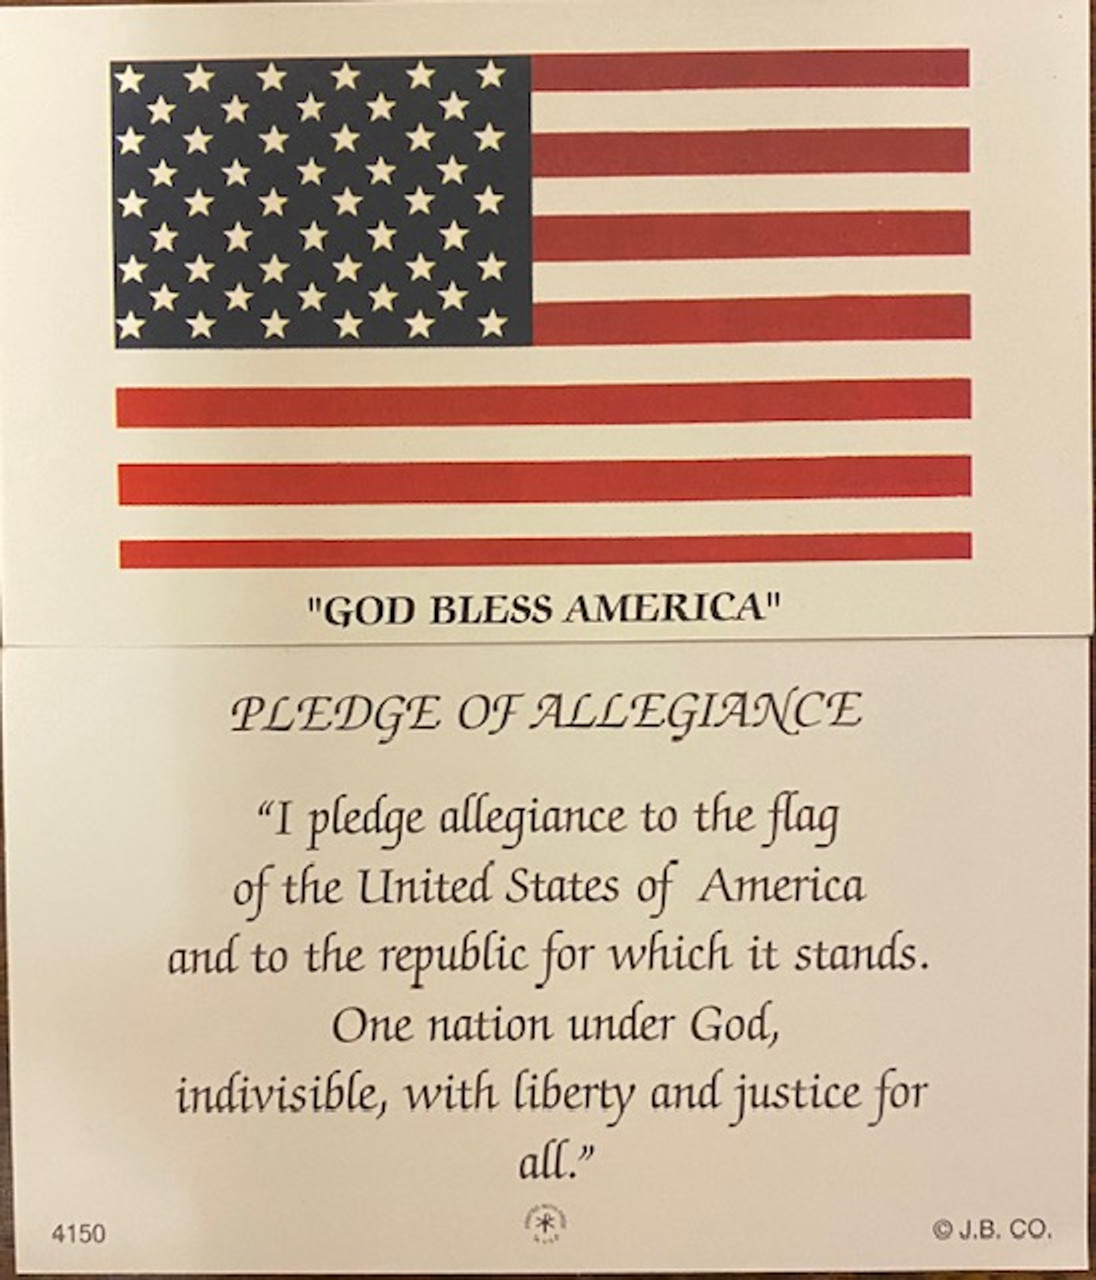 American Flag with Pledge of Allegiance